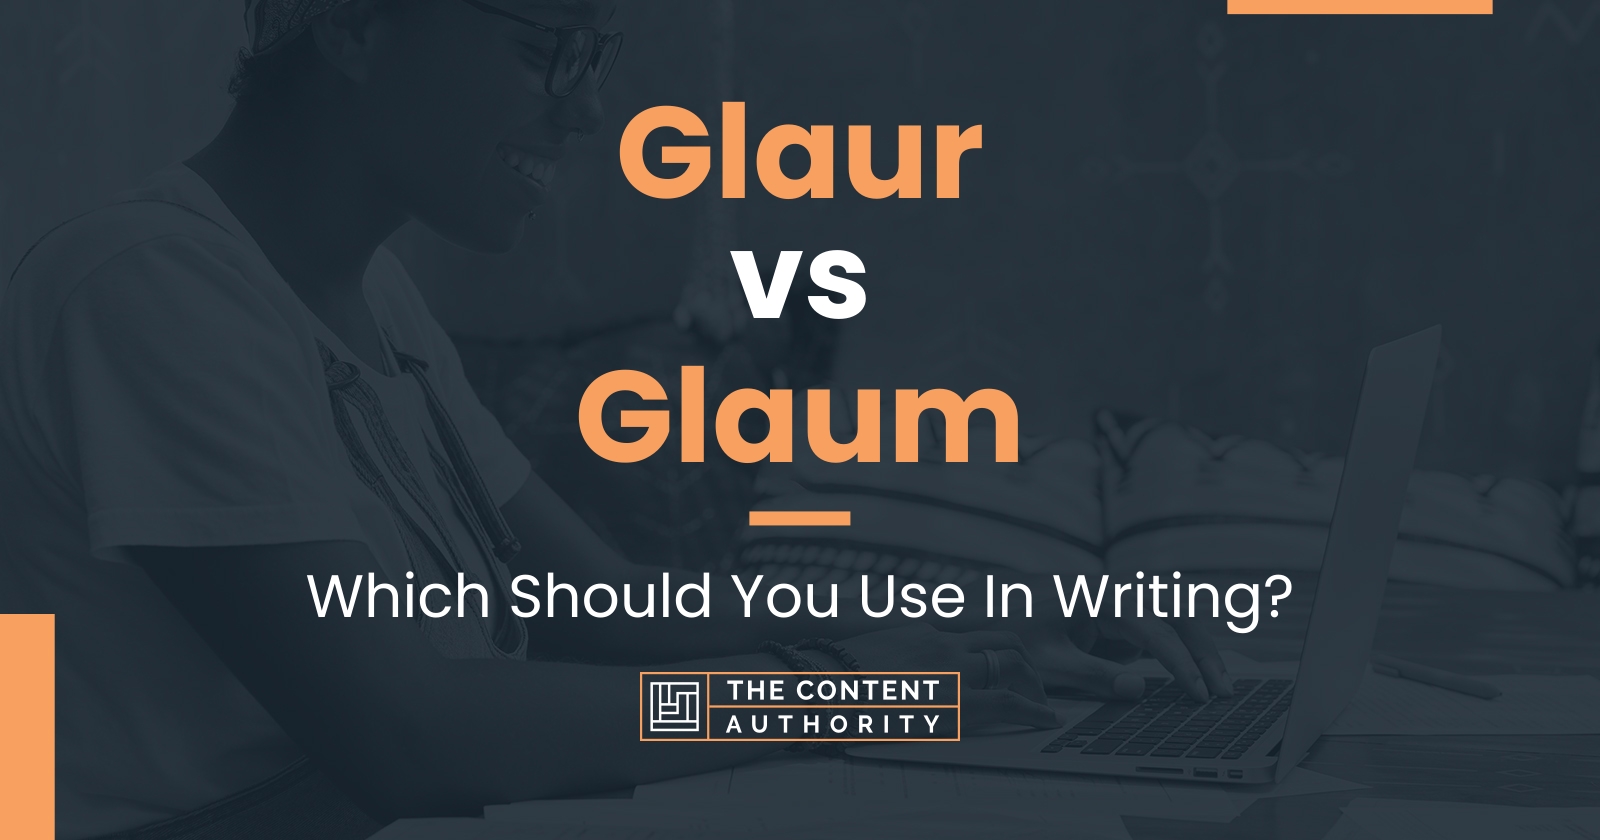 Glaur vs Glaum: Which Should You Use In Writing?